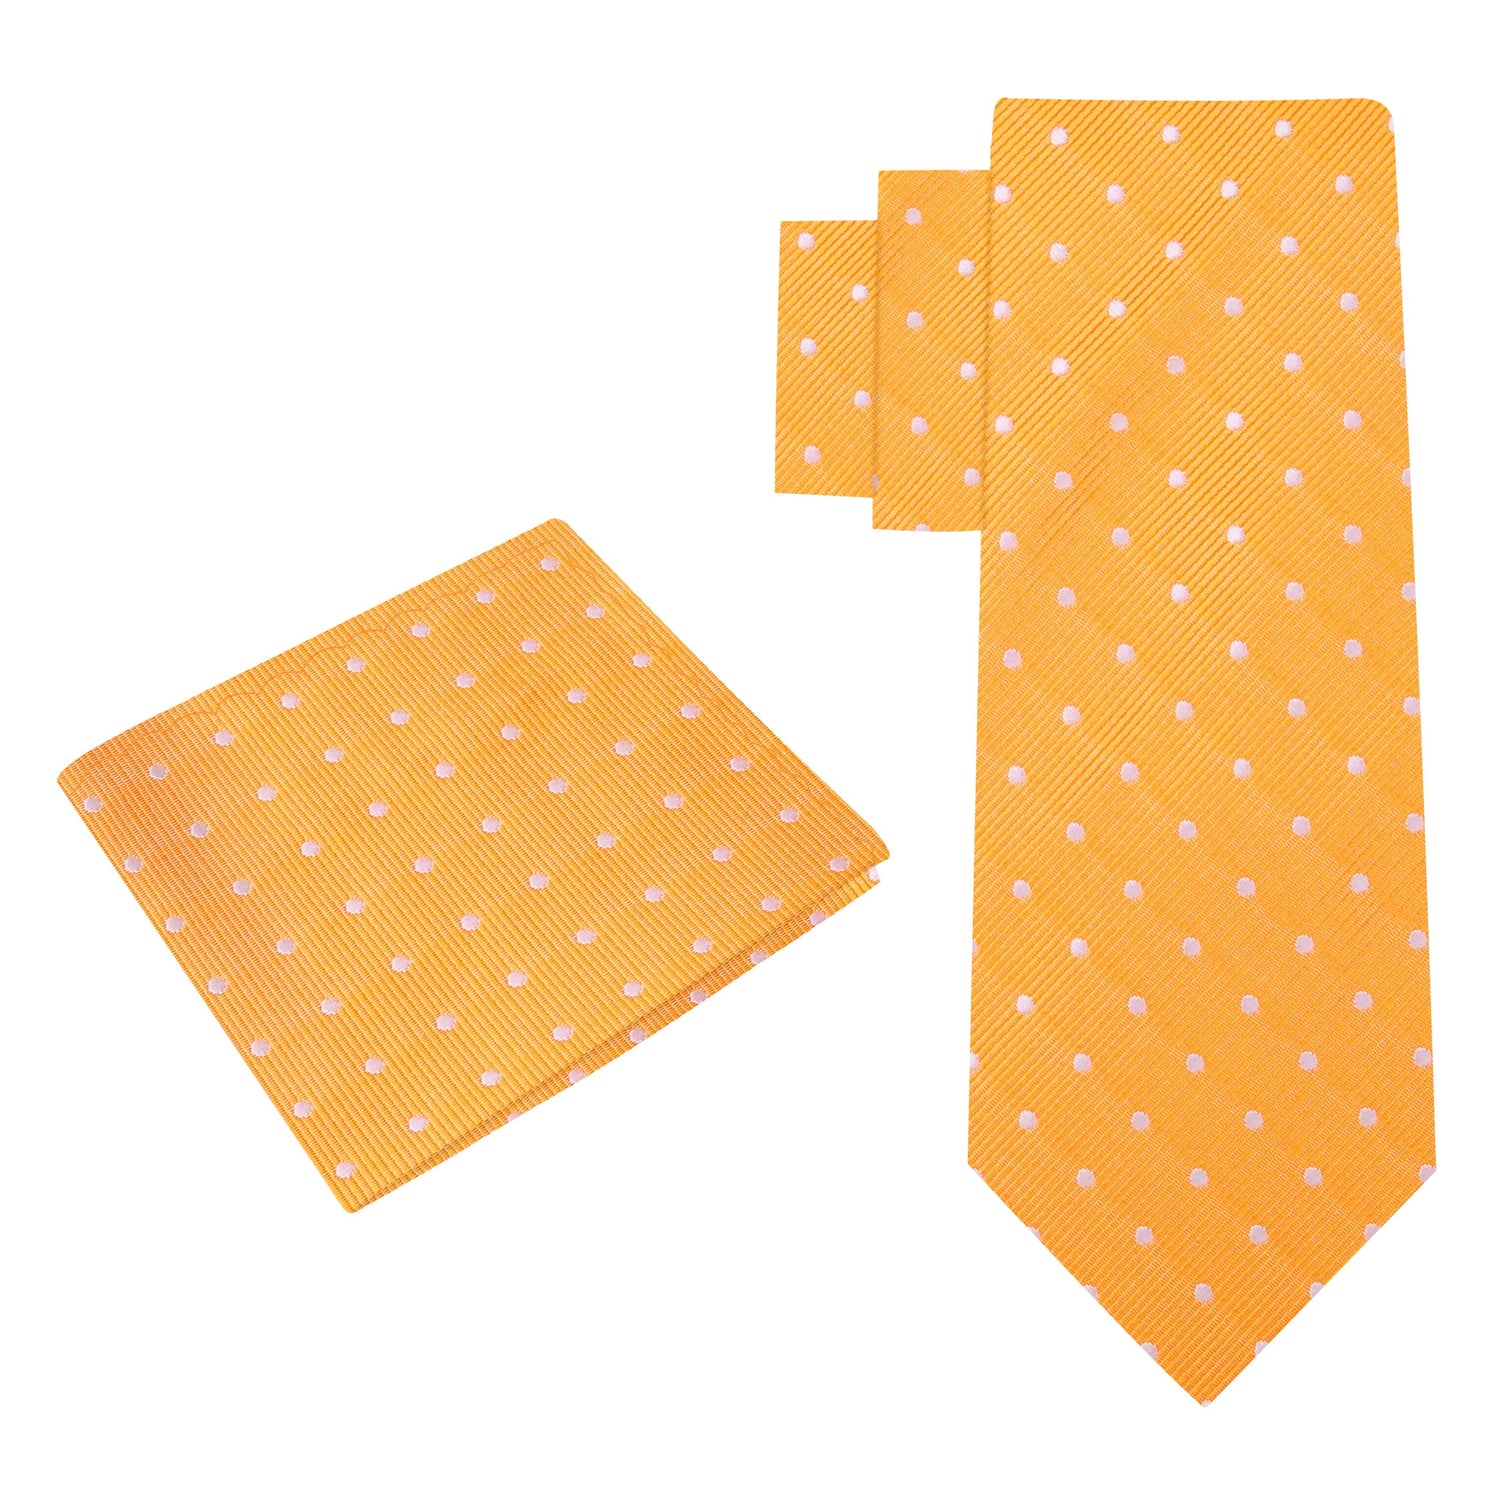 View 2: Tangerine and White Main Event Polka Necktie and Square